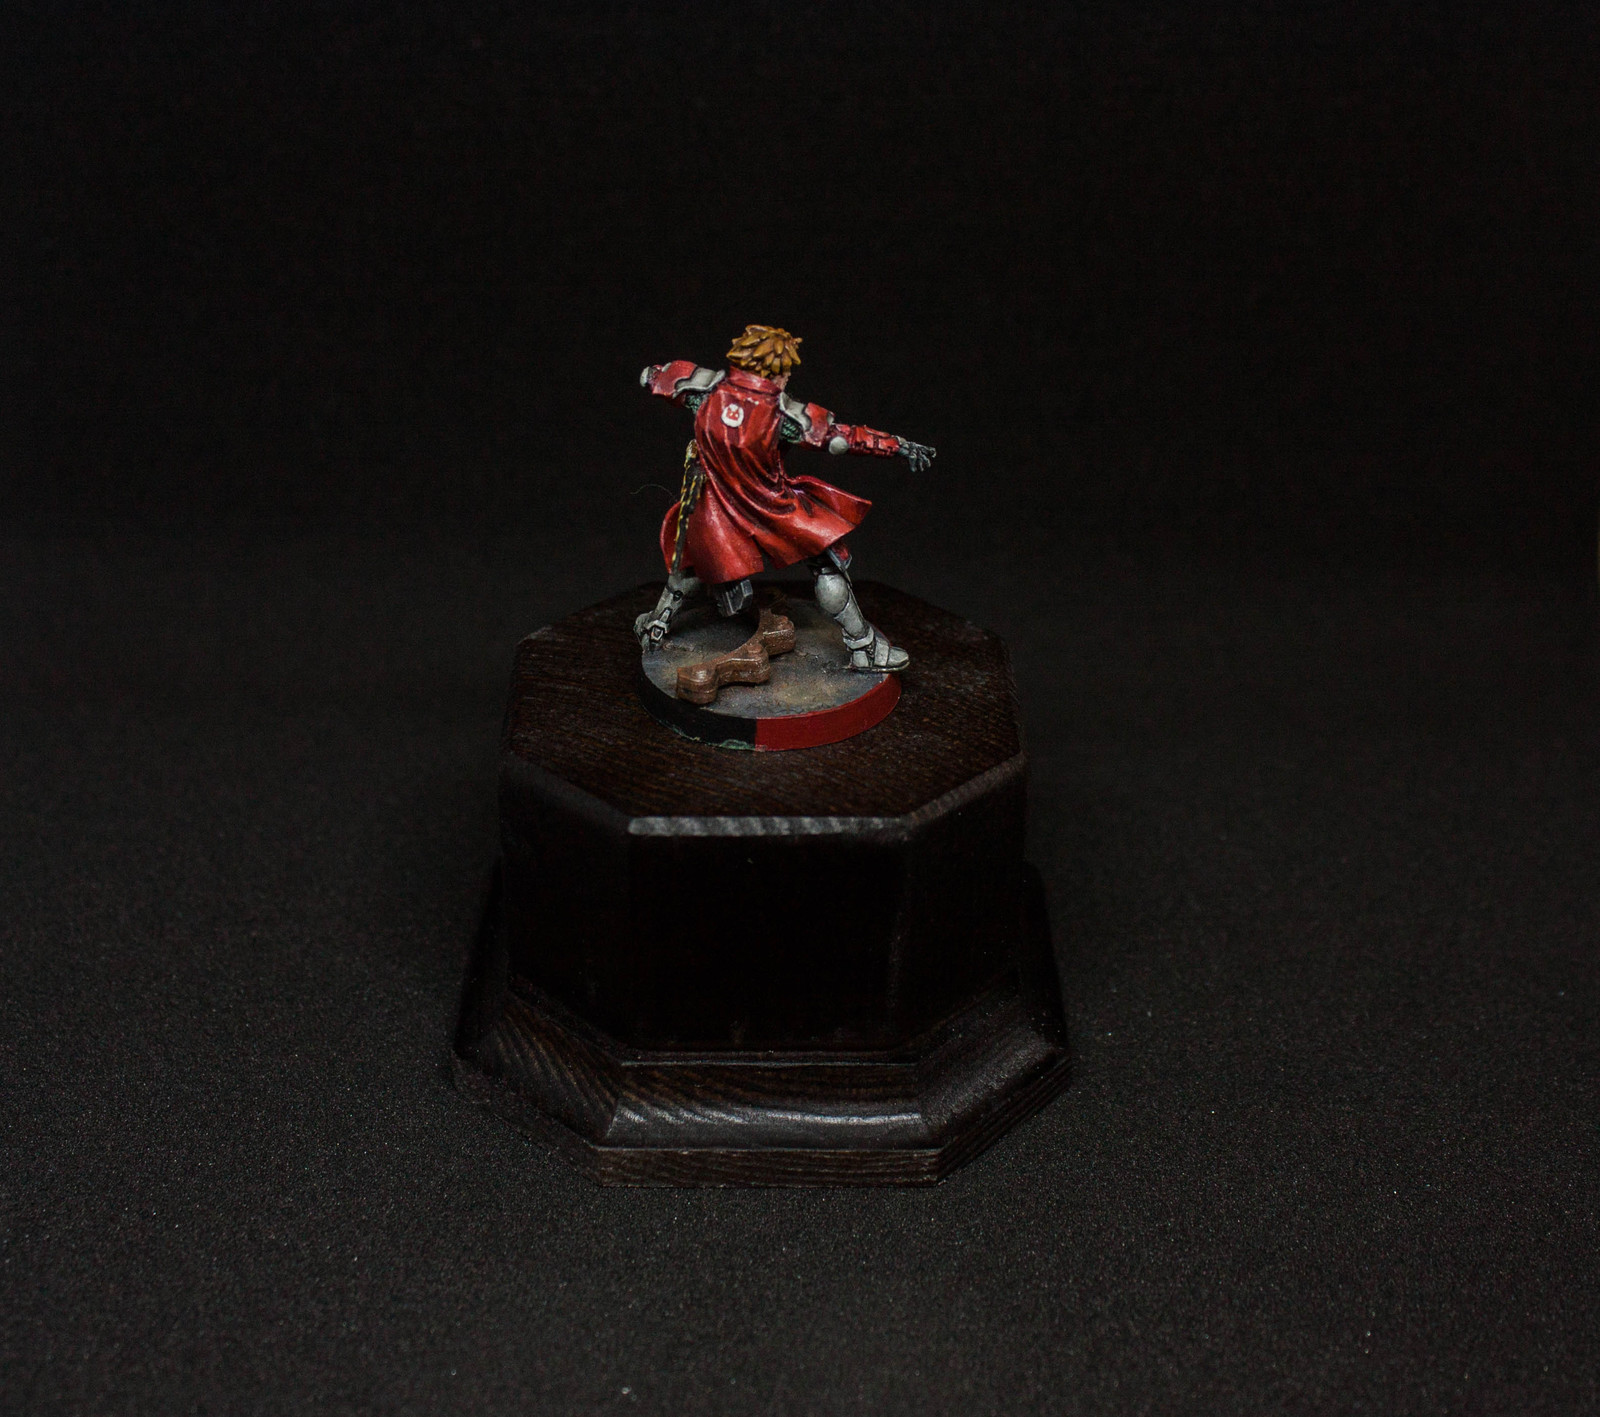 New photos in lightbox. - My, Modeling, 28mm, Desktop wargame, Fantasy, Tin soldiers, Painting, Longpost